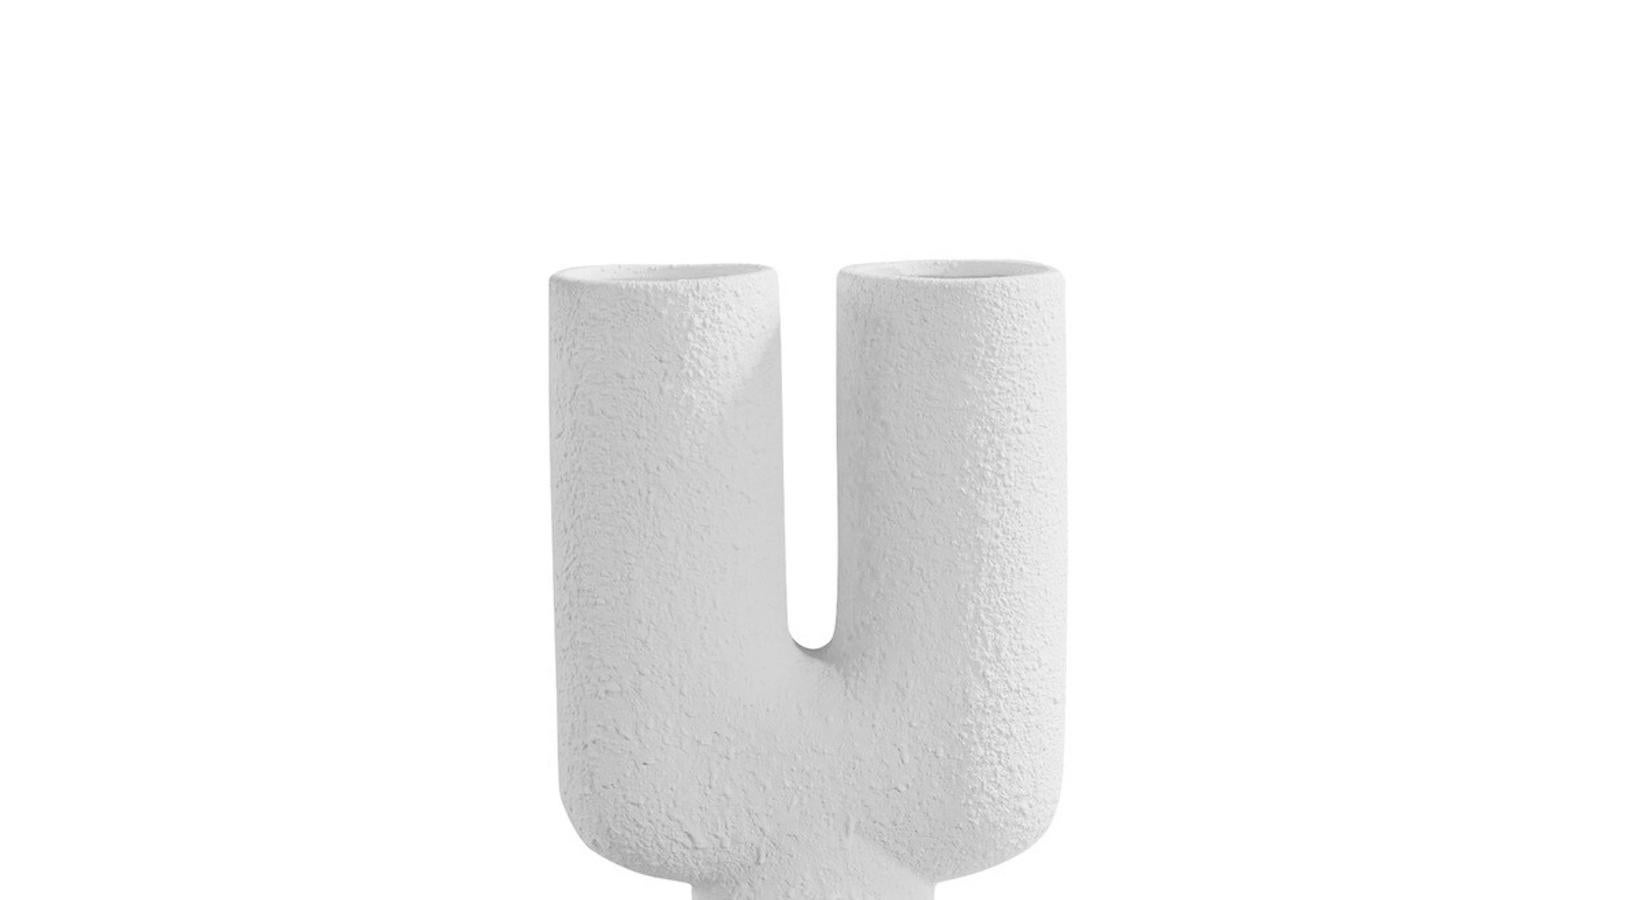 Contemporary Danish tall textured white ceramic vase with two round spouts on a base of two round spheres.
Very sculptural in design.
Smaller version available S5602
Two available and sold individually.

